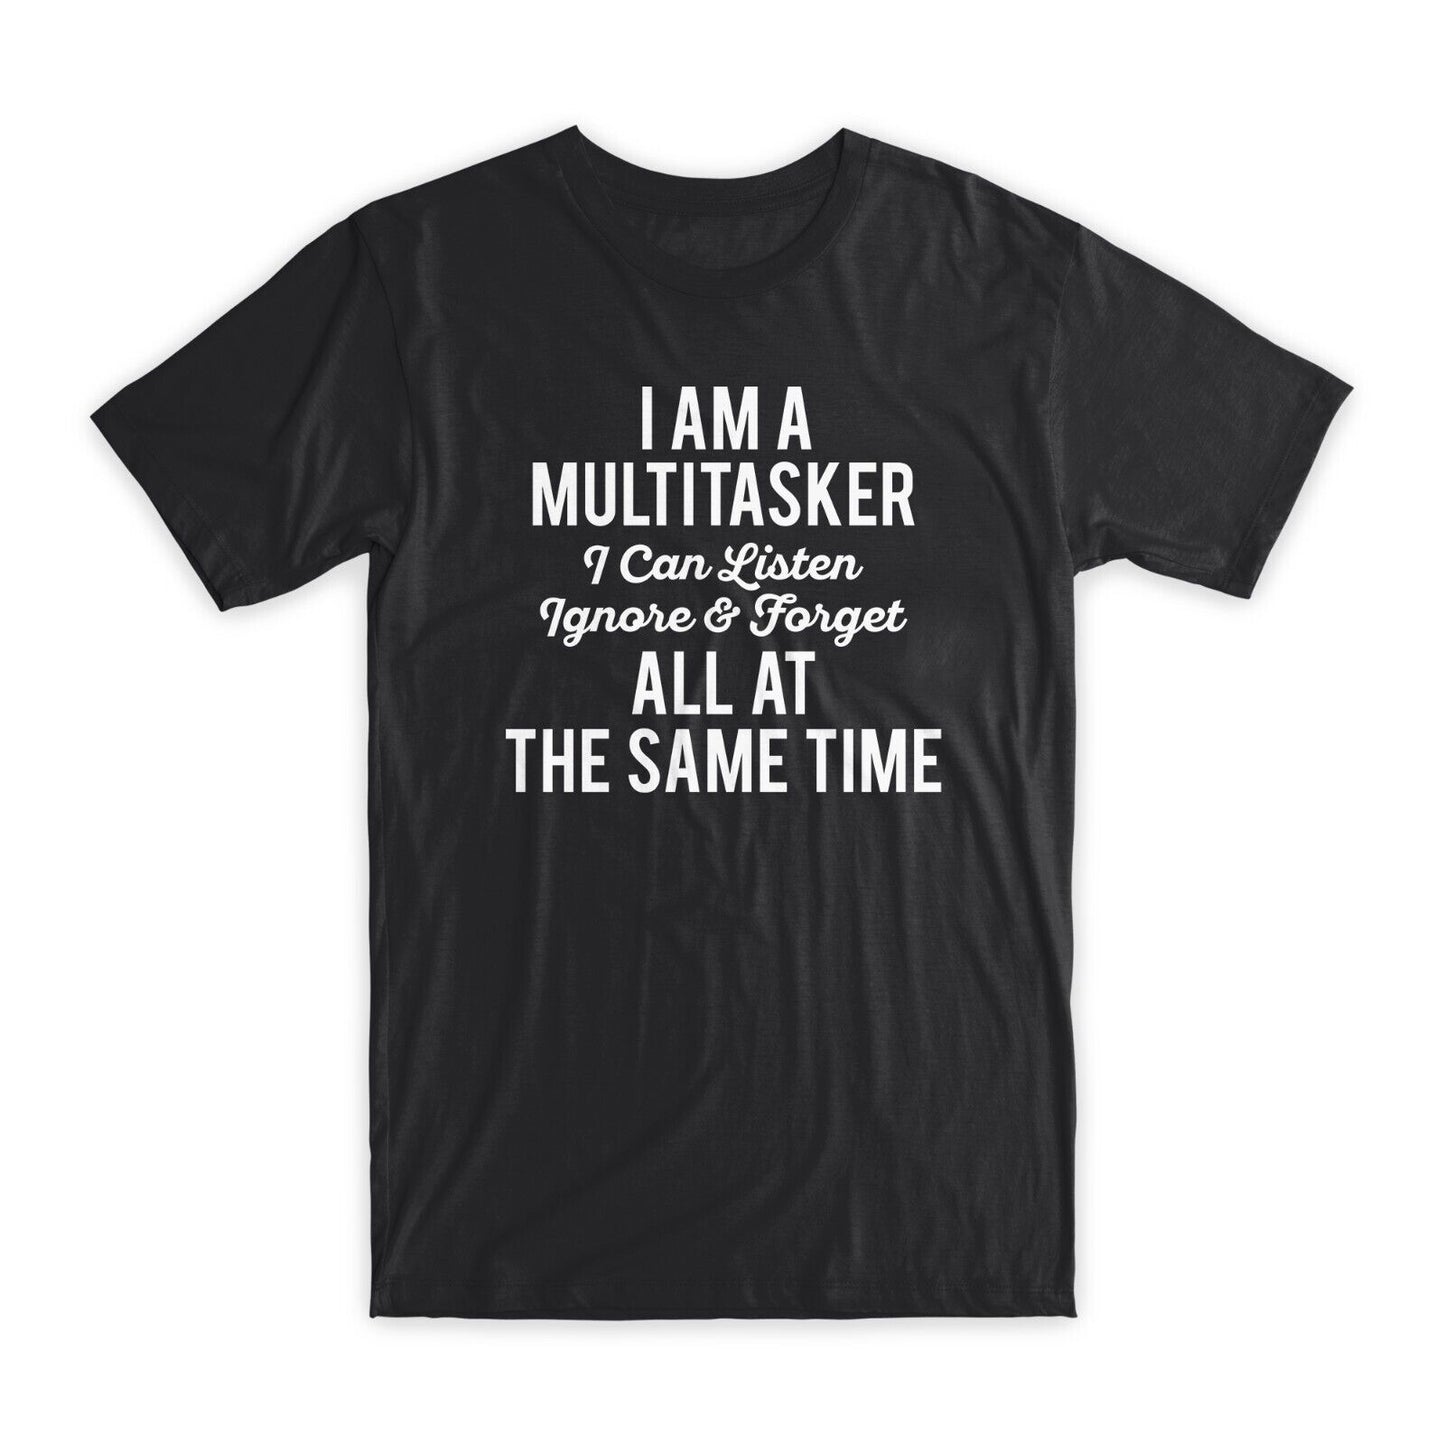 I am A Multitasker T-Shirt Premium Soft Cotton Crew Neck Funny Tees Gifts NEW